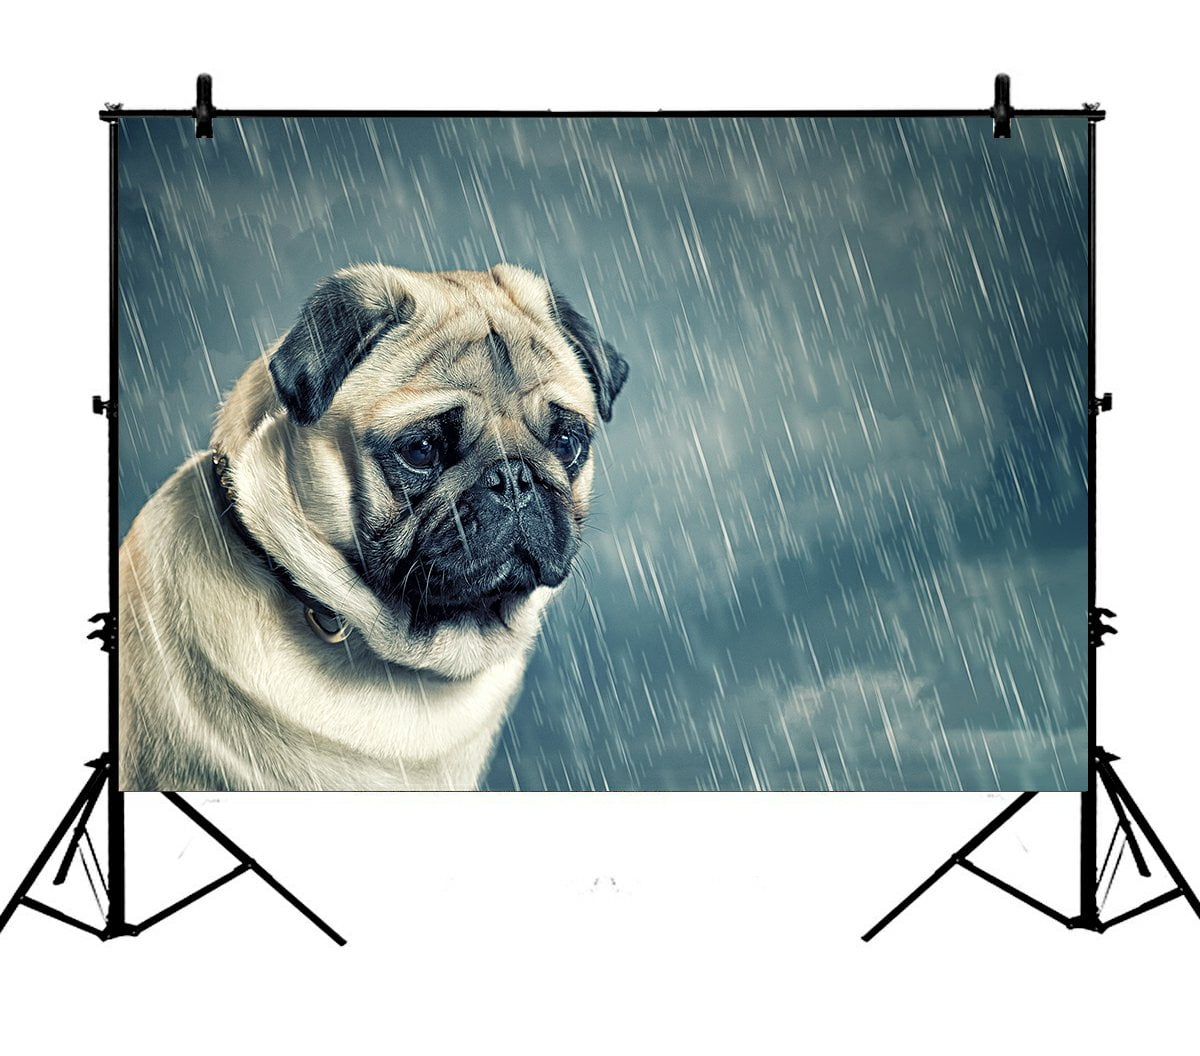 Pug 10x12 FT Backdrop Photographers,Detailed Portrait Drawing of a Dog Realistic Design of The Pet Animal Digital Art Background for Child Baby Shower Photo Vinyl Studio Prop Photobooth Photoshoot